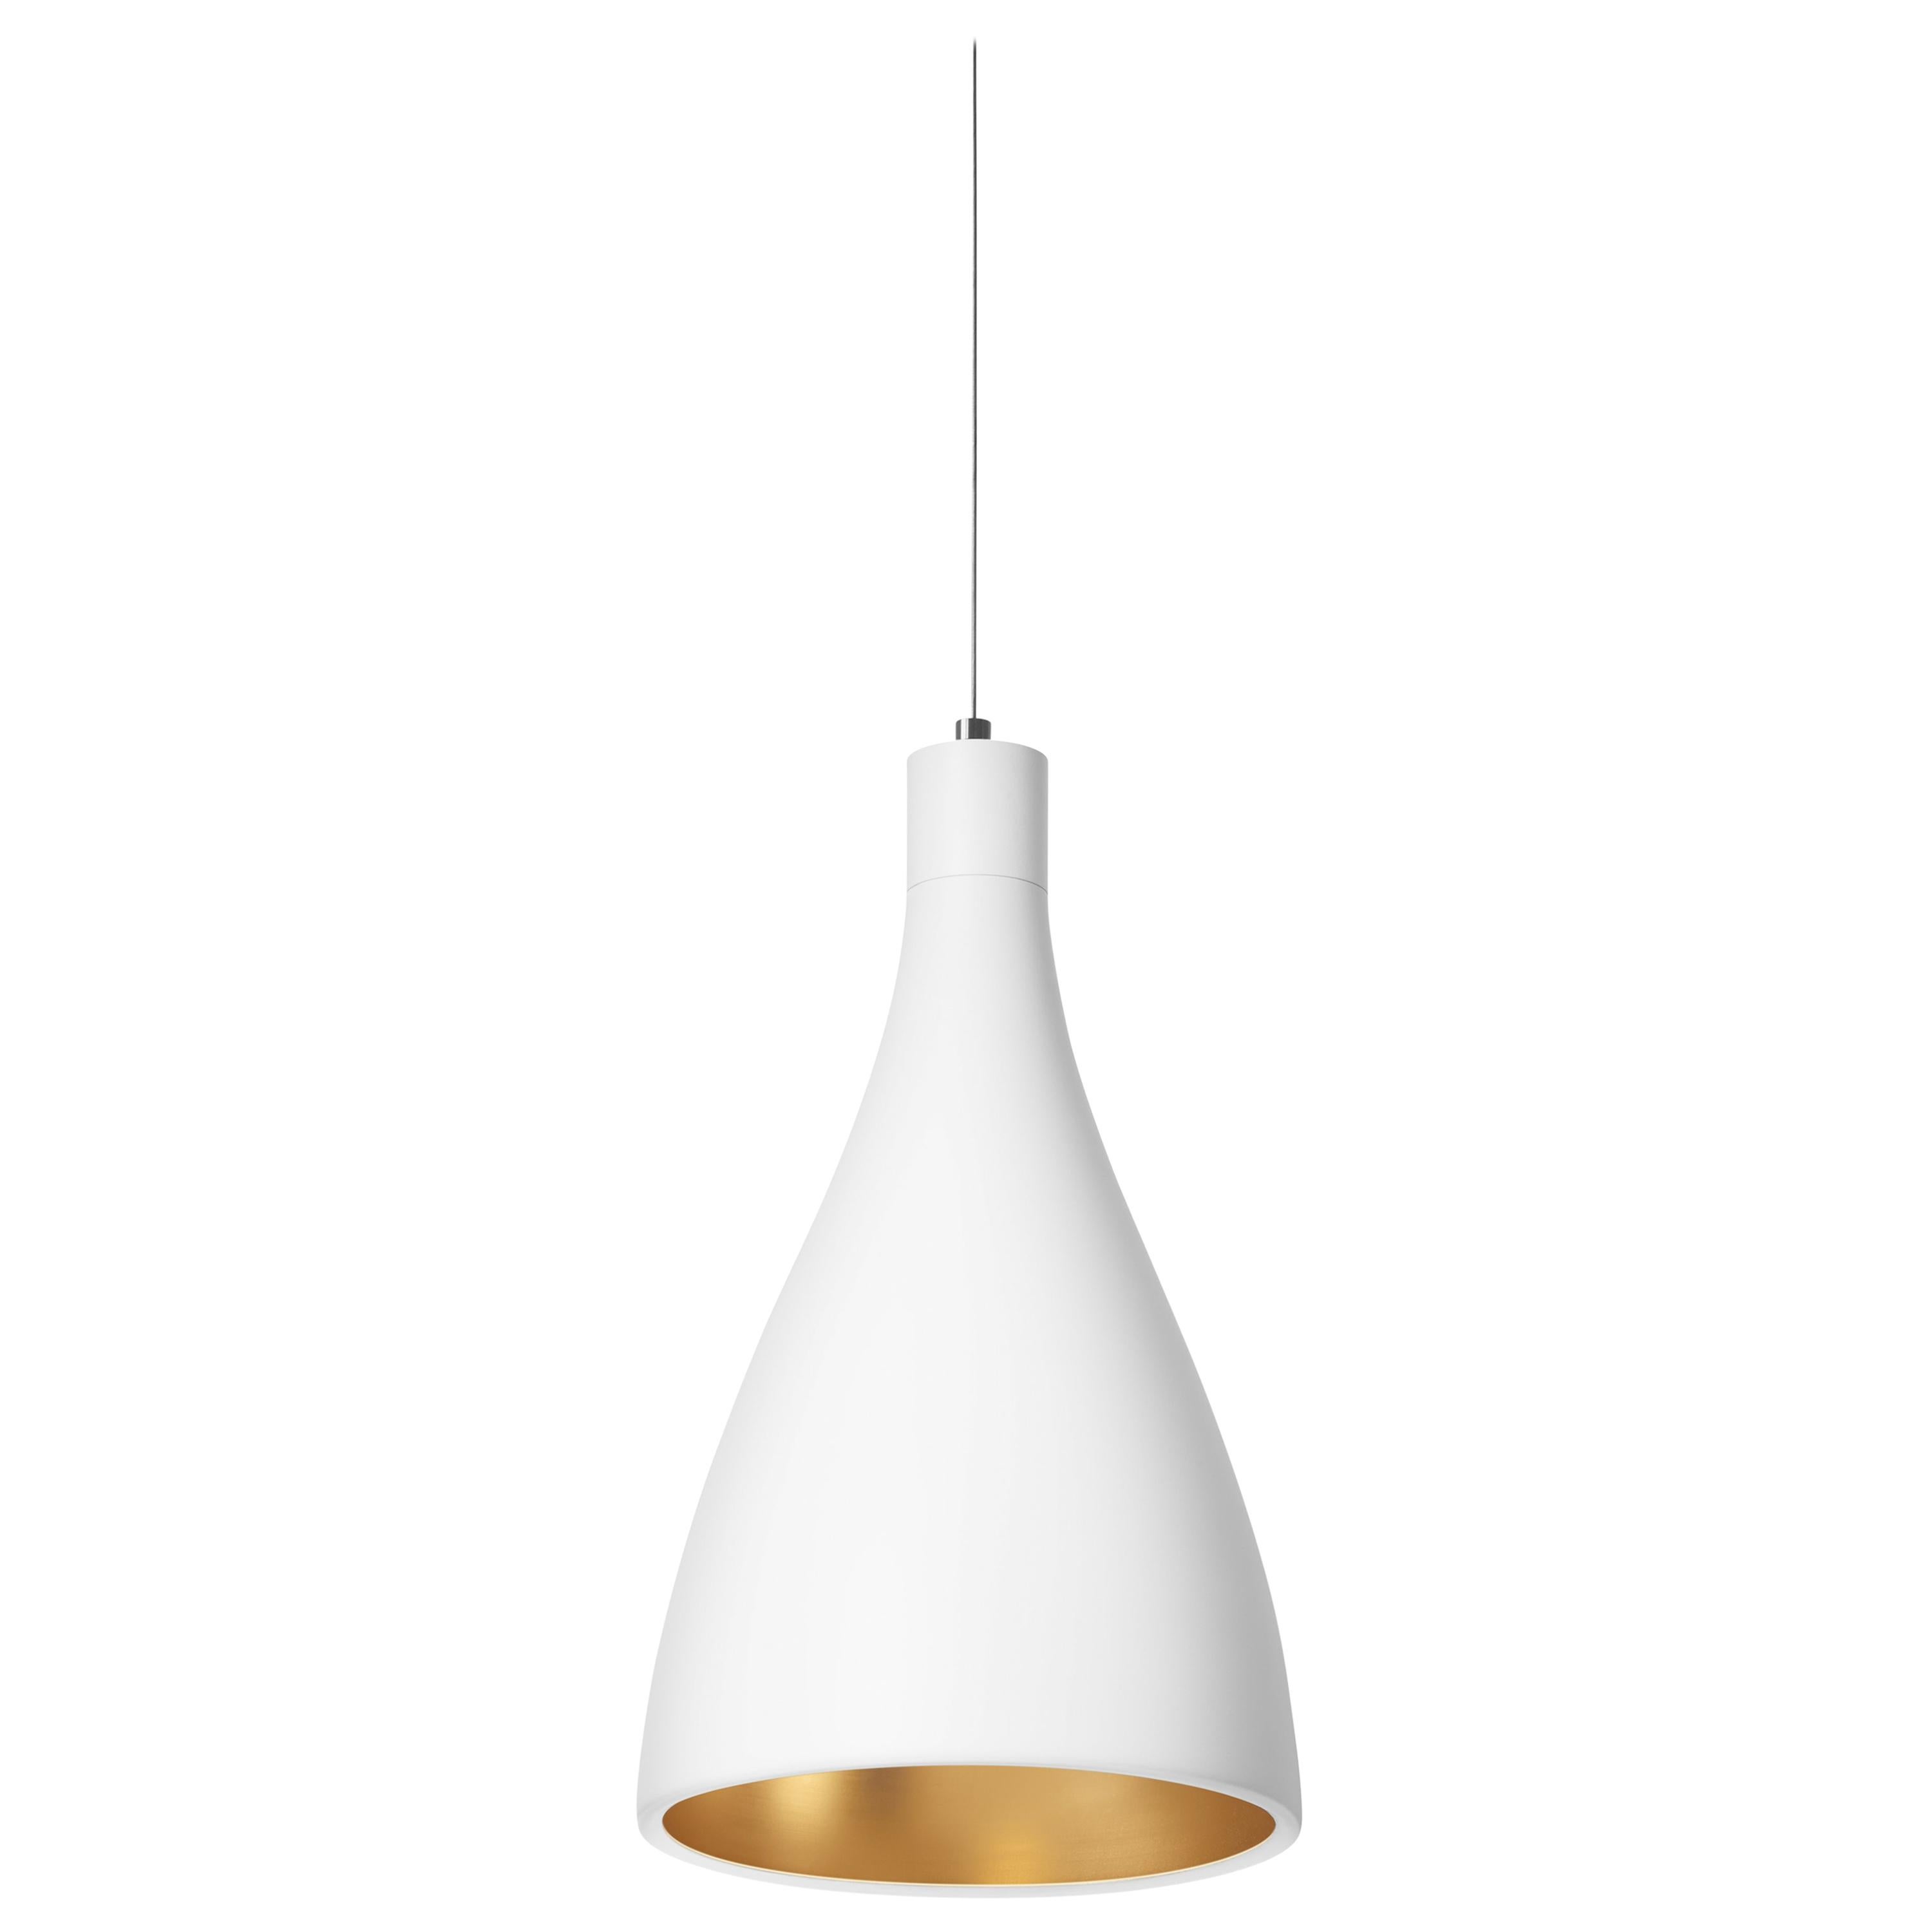 Narrow Swell String Pendant Light in White and Brass by Pablo Designs